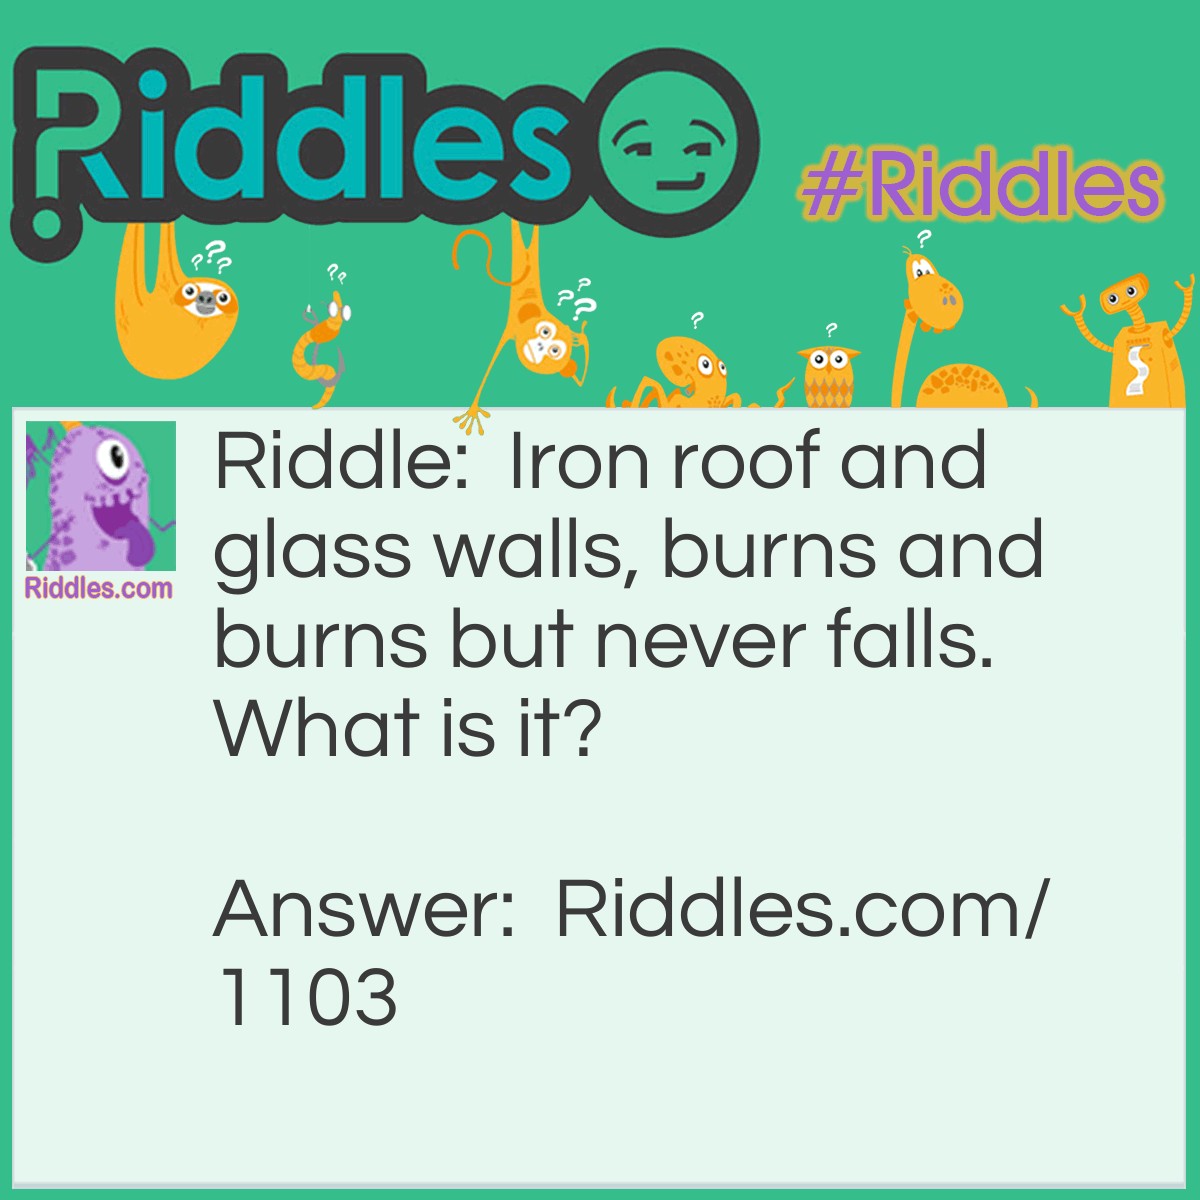 Riddle: Iron roof and glass walls, burns and burns but never falls.
What is it? Answer: A lantern.